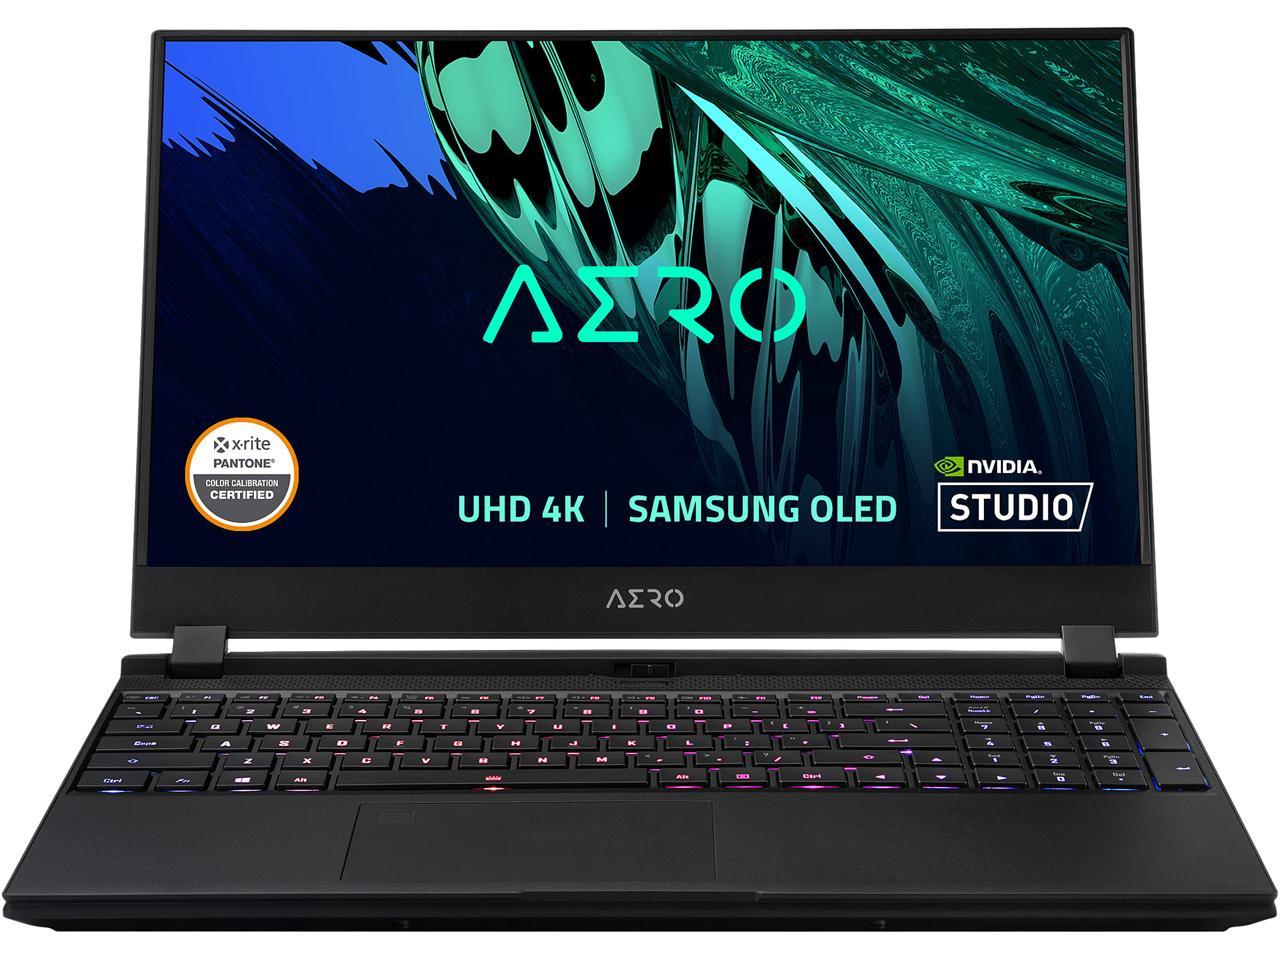 GIGABYTE AERO 15 OLED YD-73US624SP Creator / Gaming Laptop for $1799 w/ FS after MIR